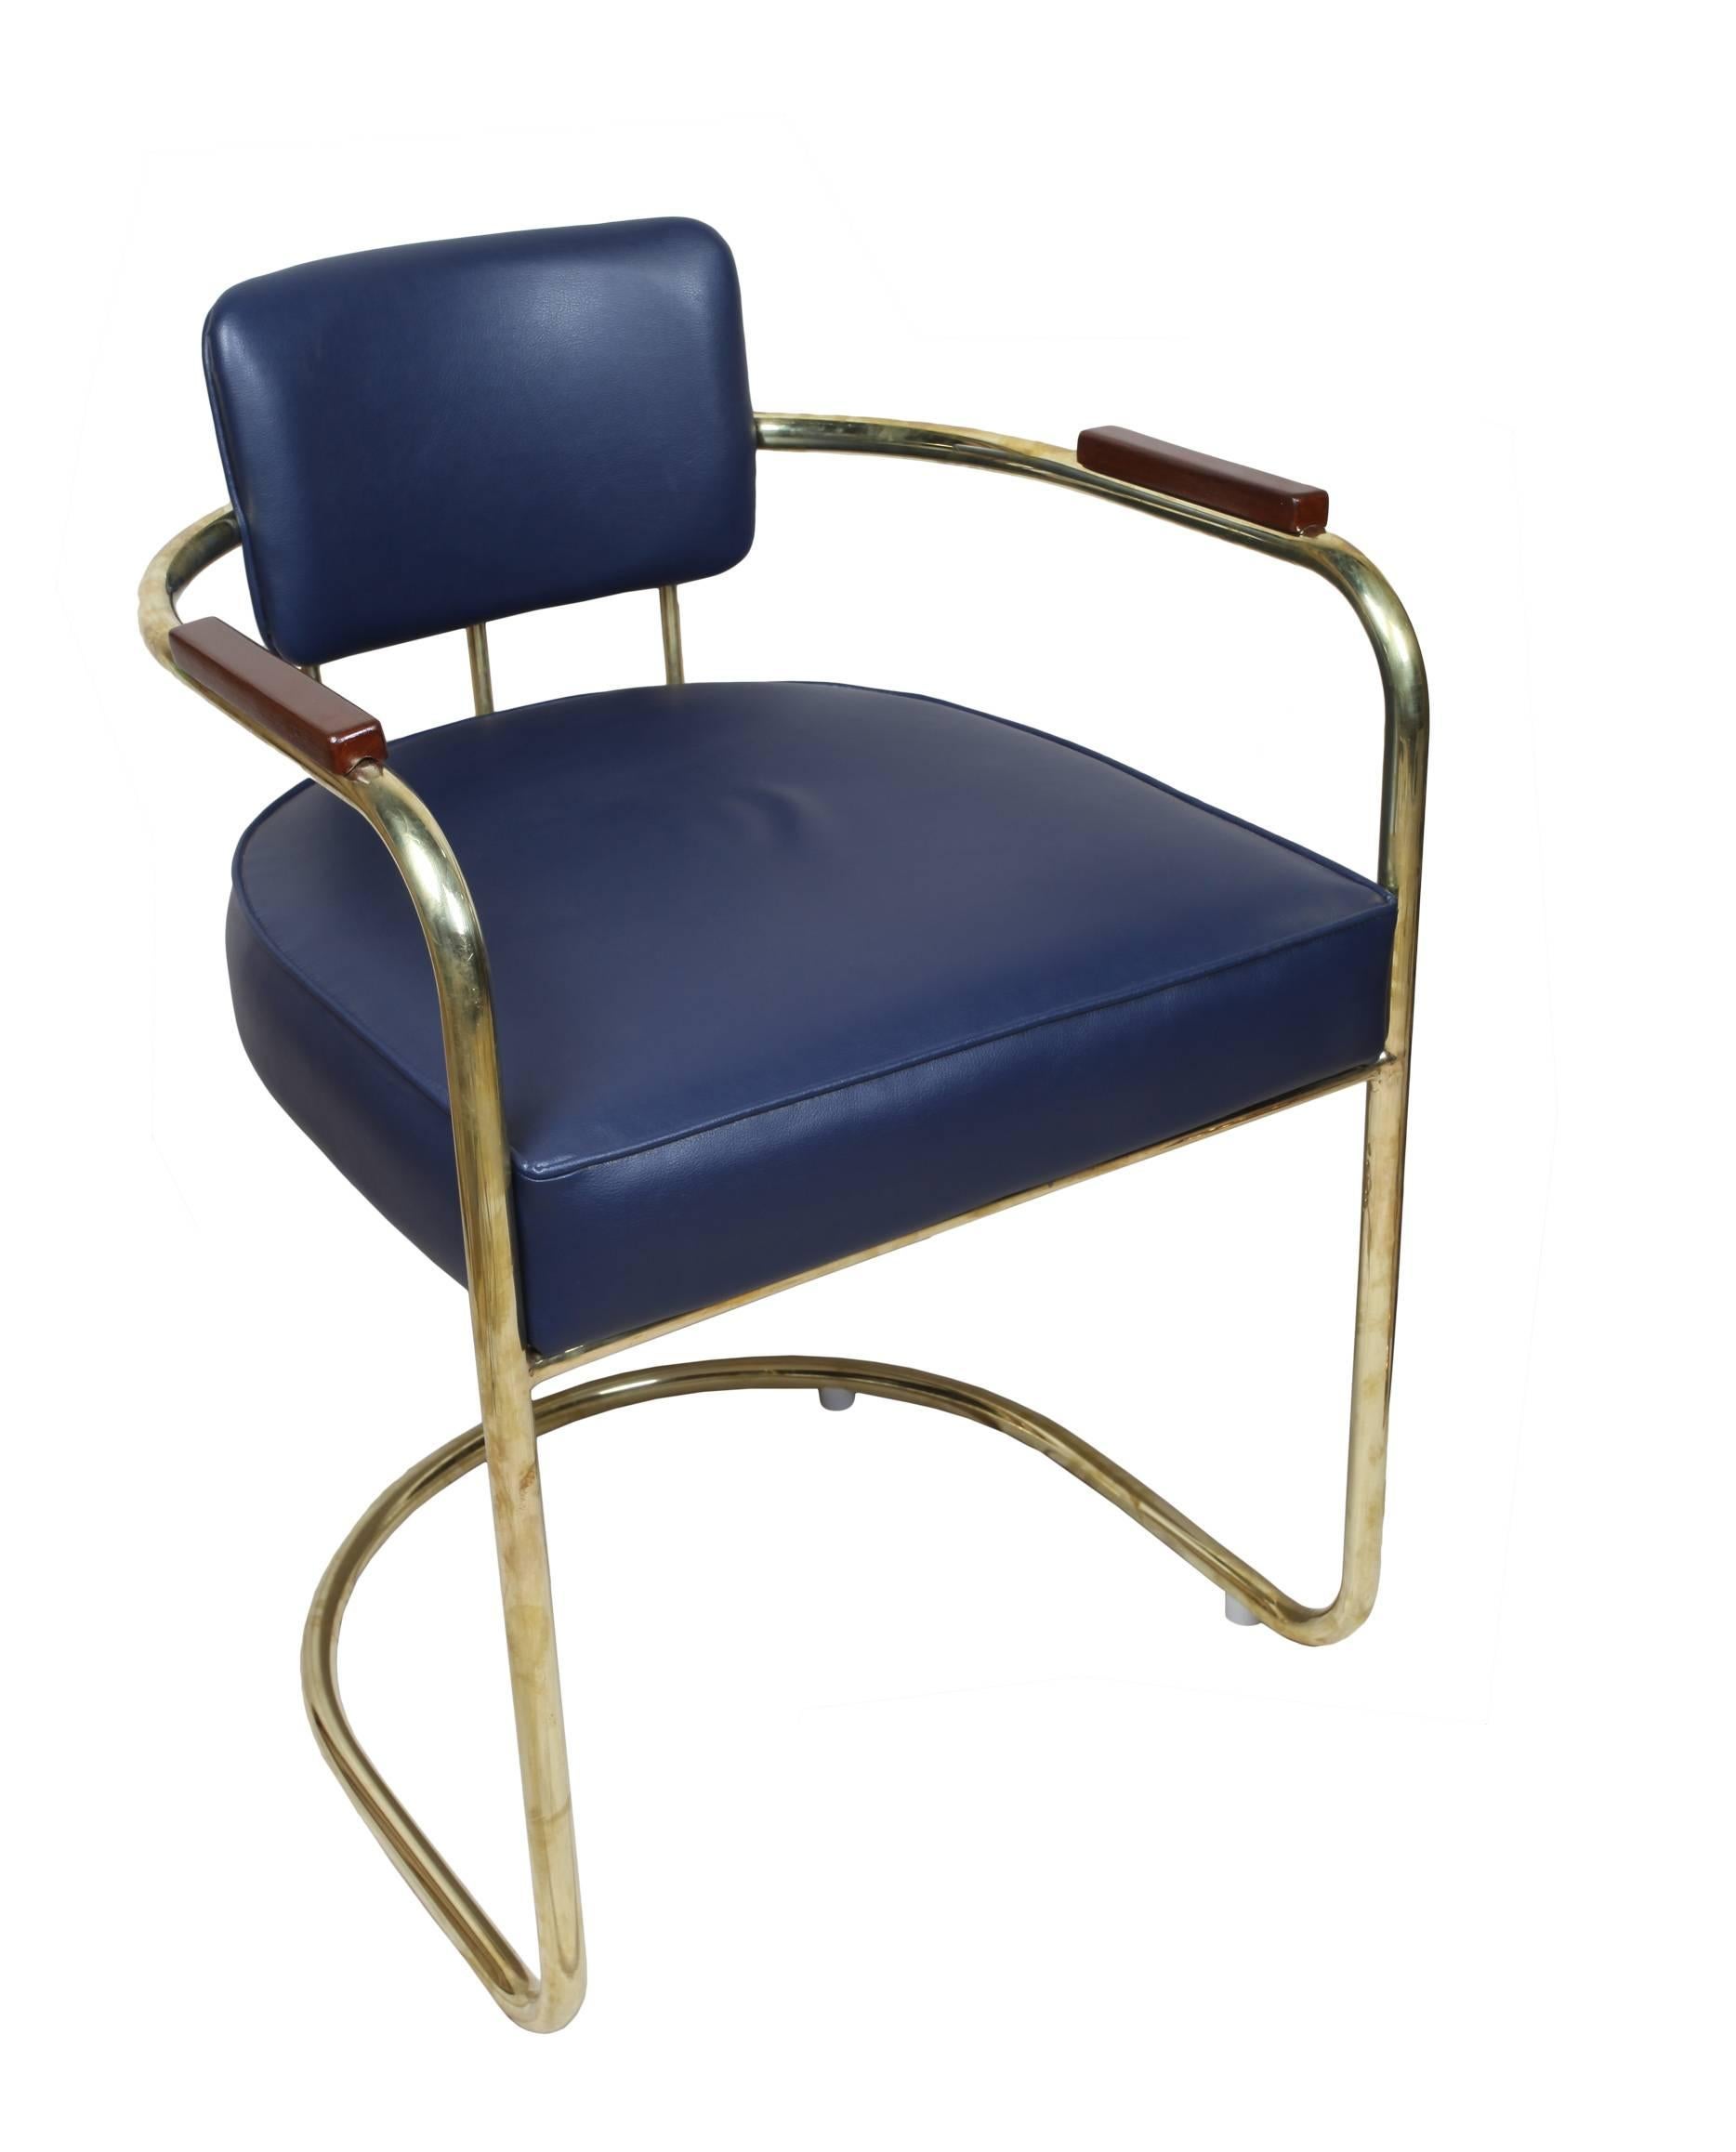 Pair of brass captain's chairs with reupholstered navy blue cushions, late 1900s. Upholstery redone. Sits slightly higher. If wanted, I can add a pair of custom-made stools with the same fabric, or a brass foot rail that sits up against a